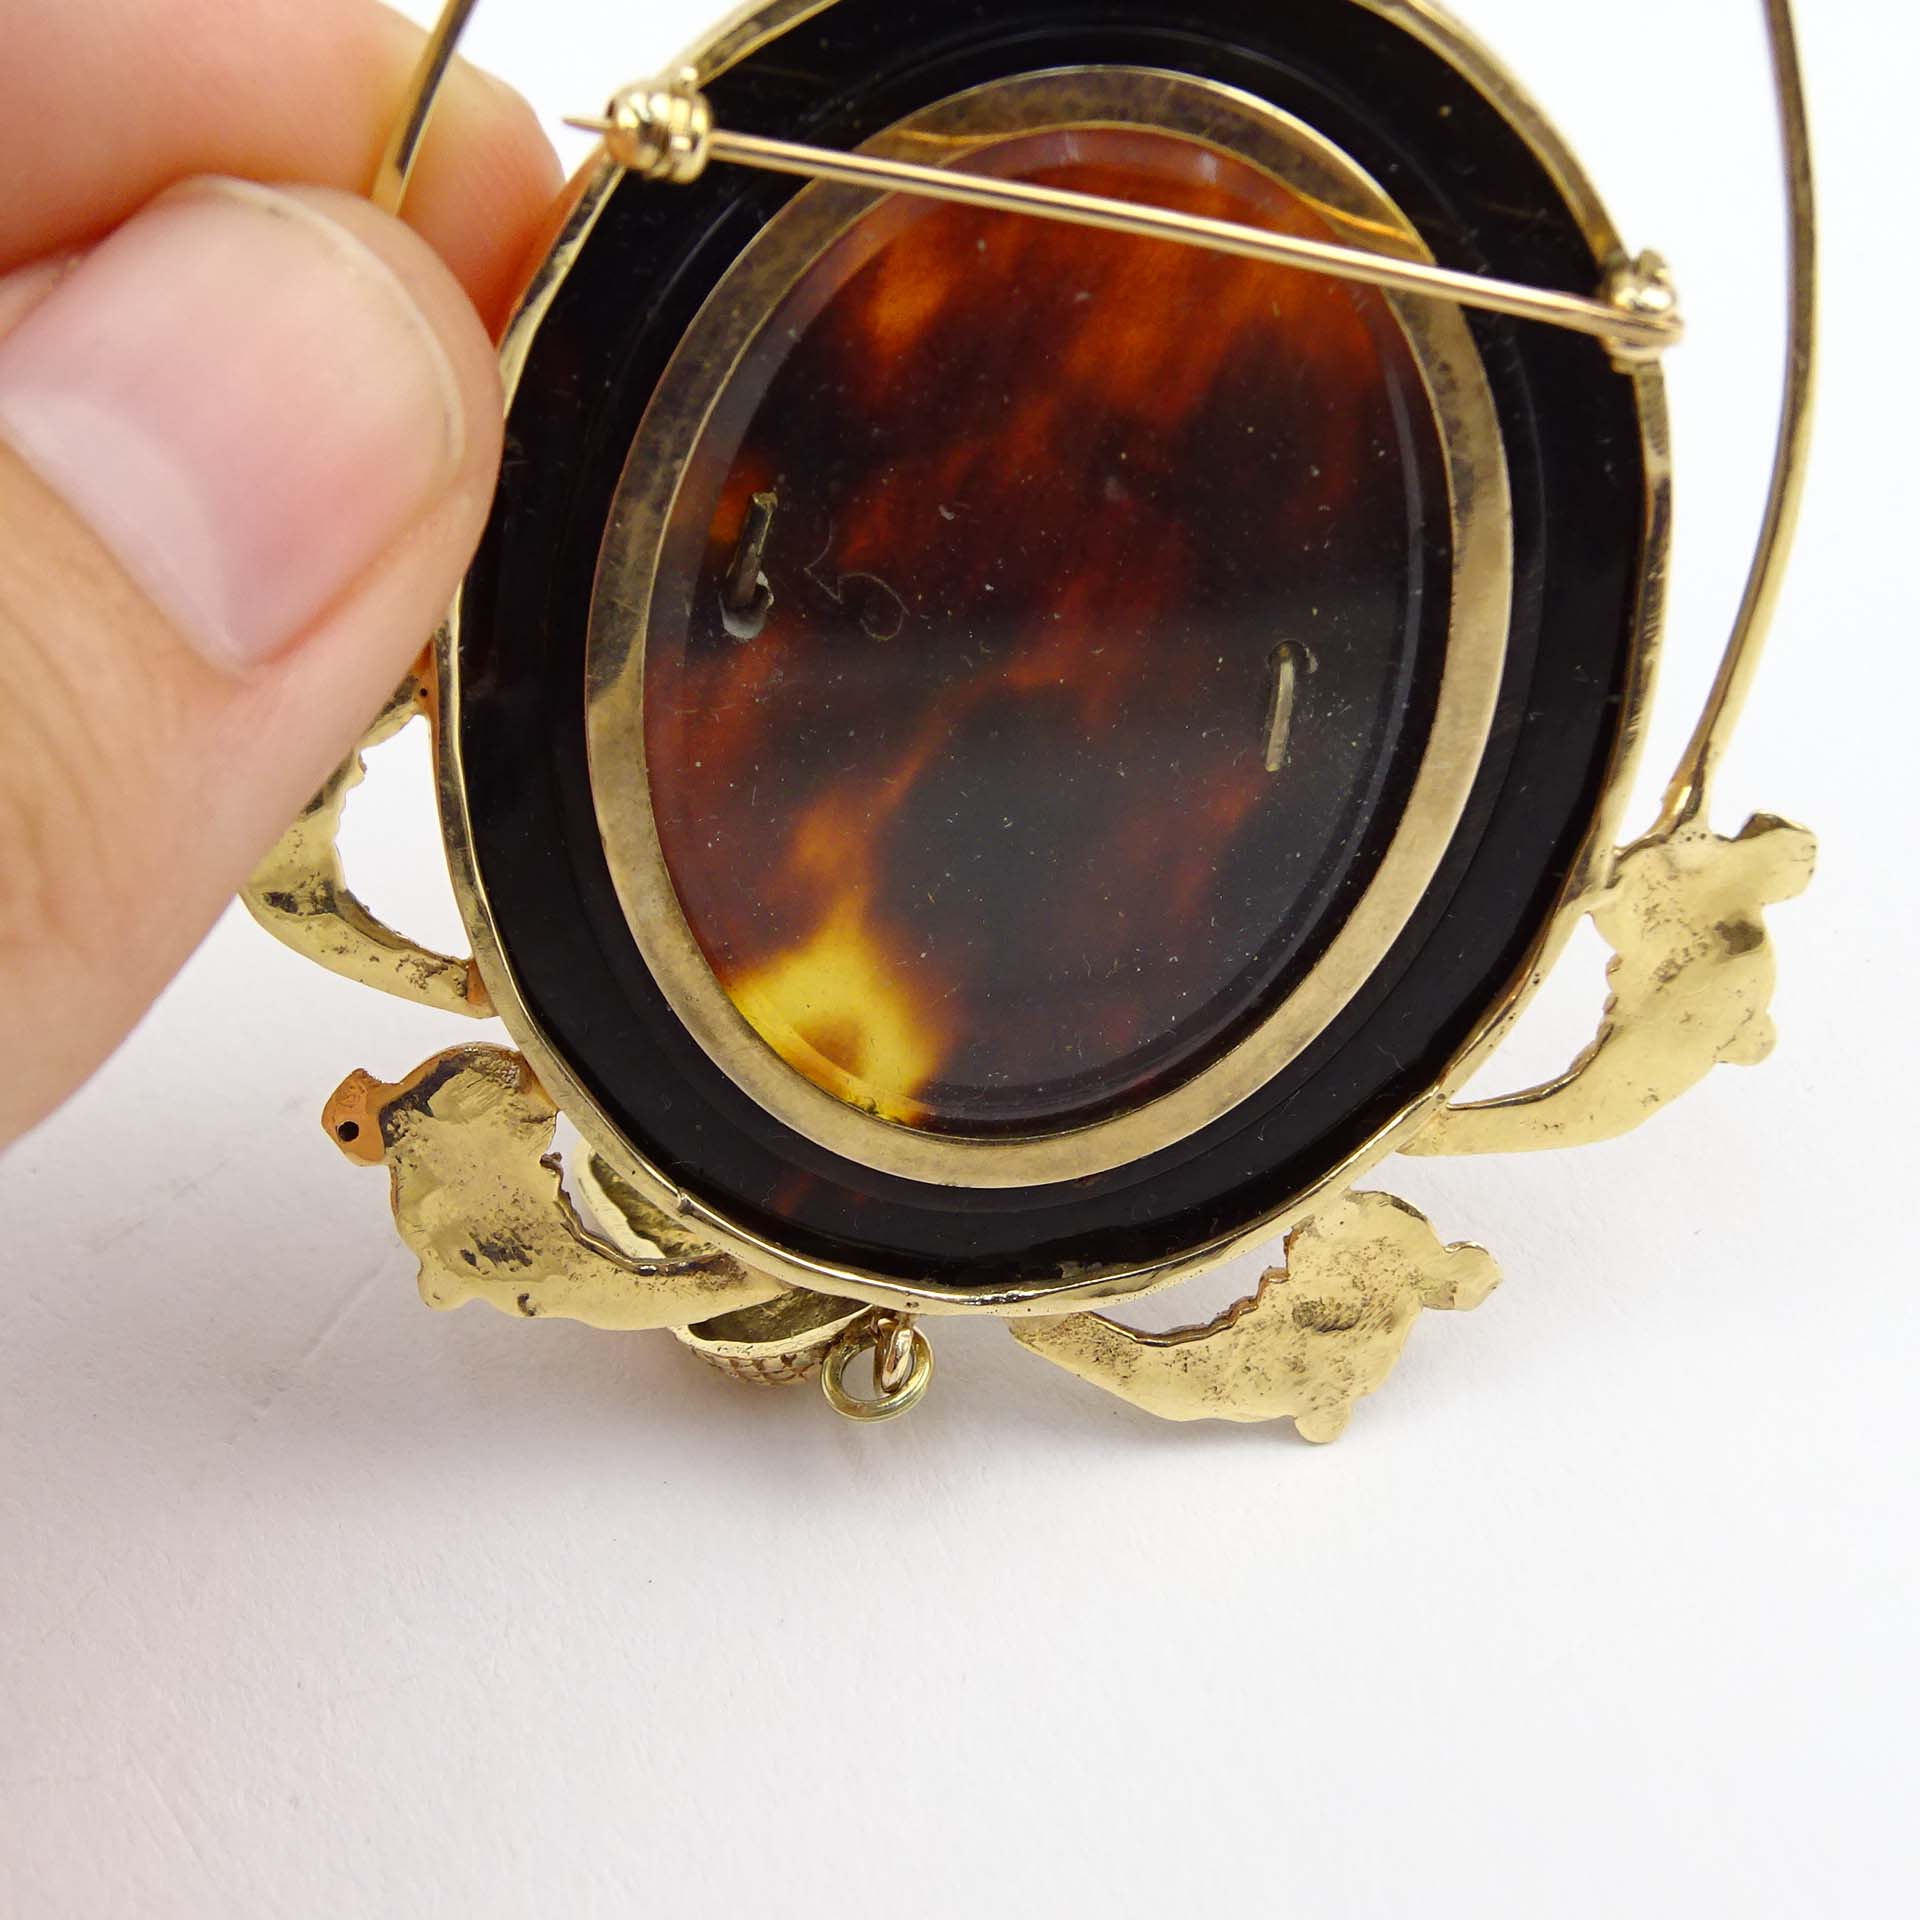 Victorian 14 Karat Yellow Gold and Tortoise Shell Pendant/Brooch with Citrine and Diamond Accents.